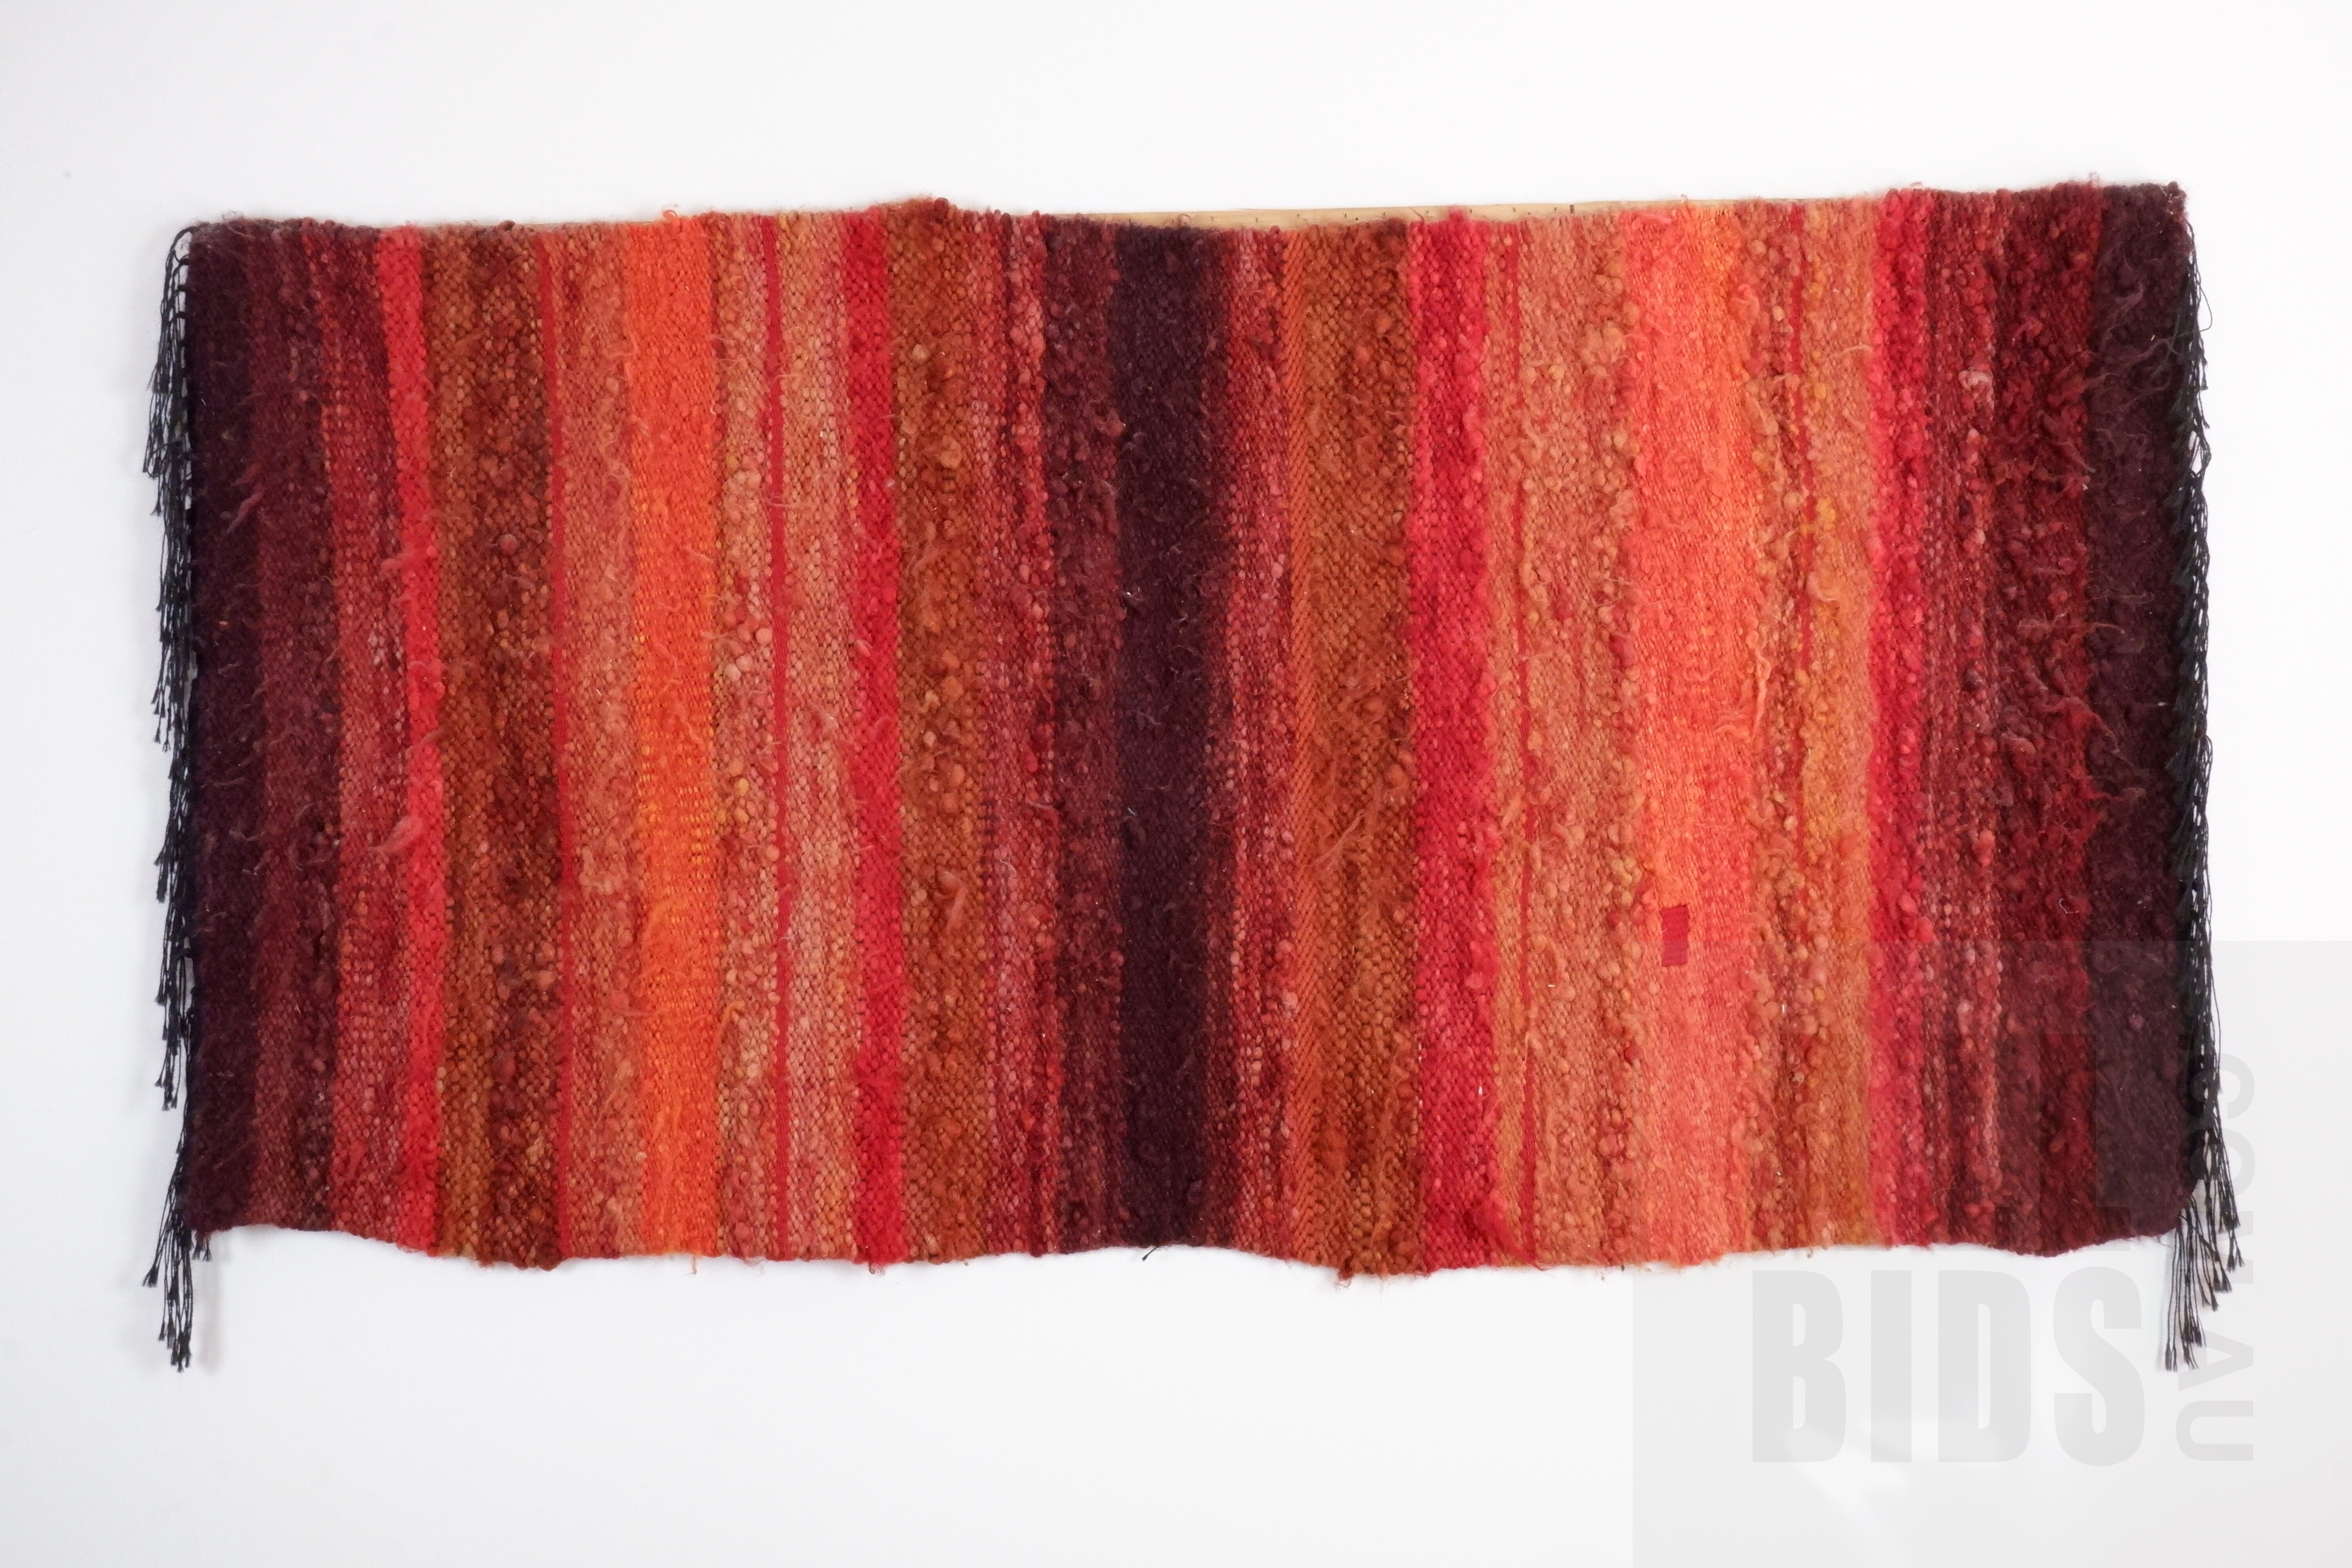 'A Woven and Tufted Wool Wall Hanging, 165 x 87 cm'